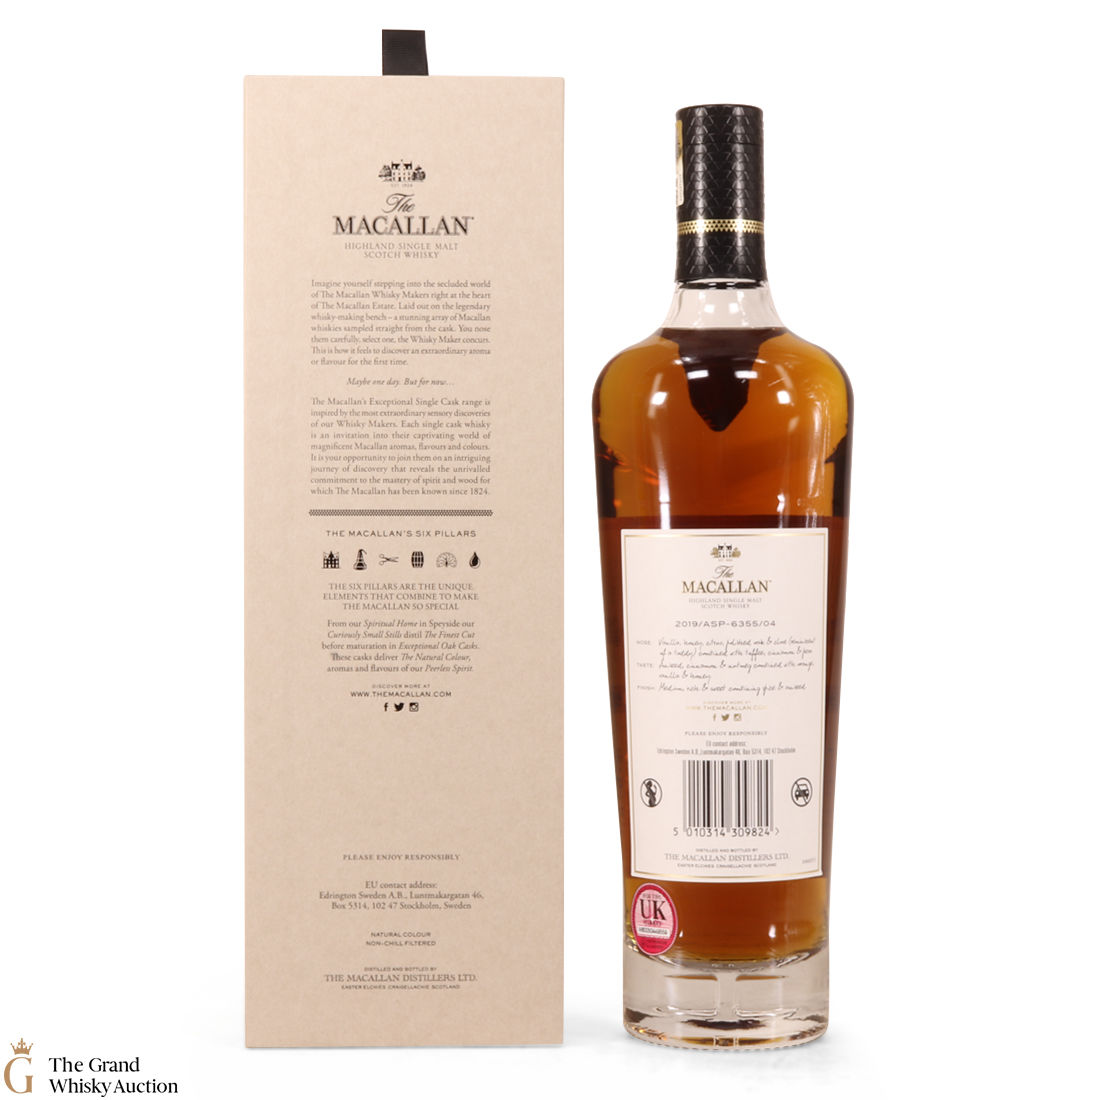 Macallan 2001 Exceptional Cask 6355 04 2019 Release Auction The Grand Whisky Auction